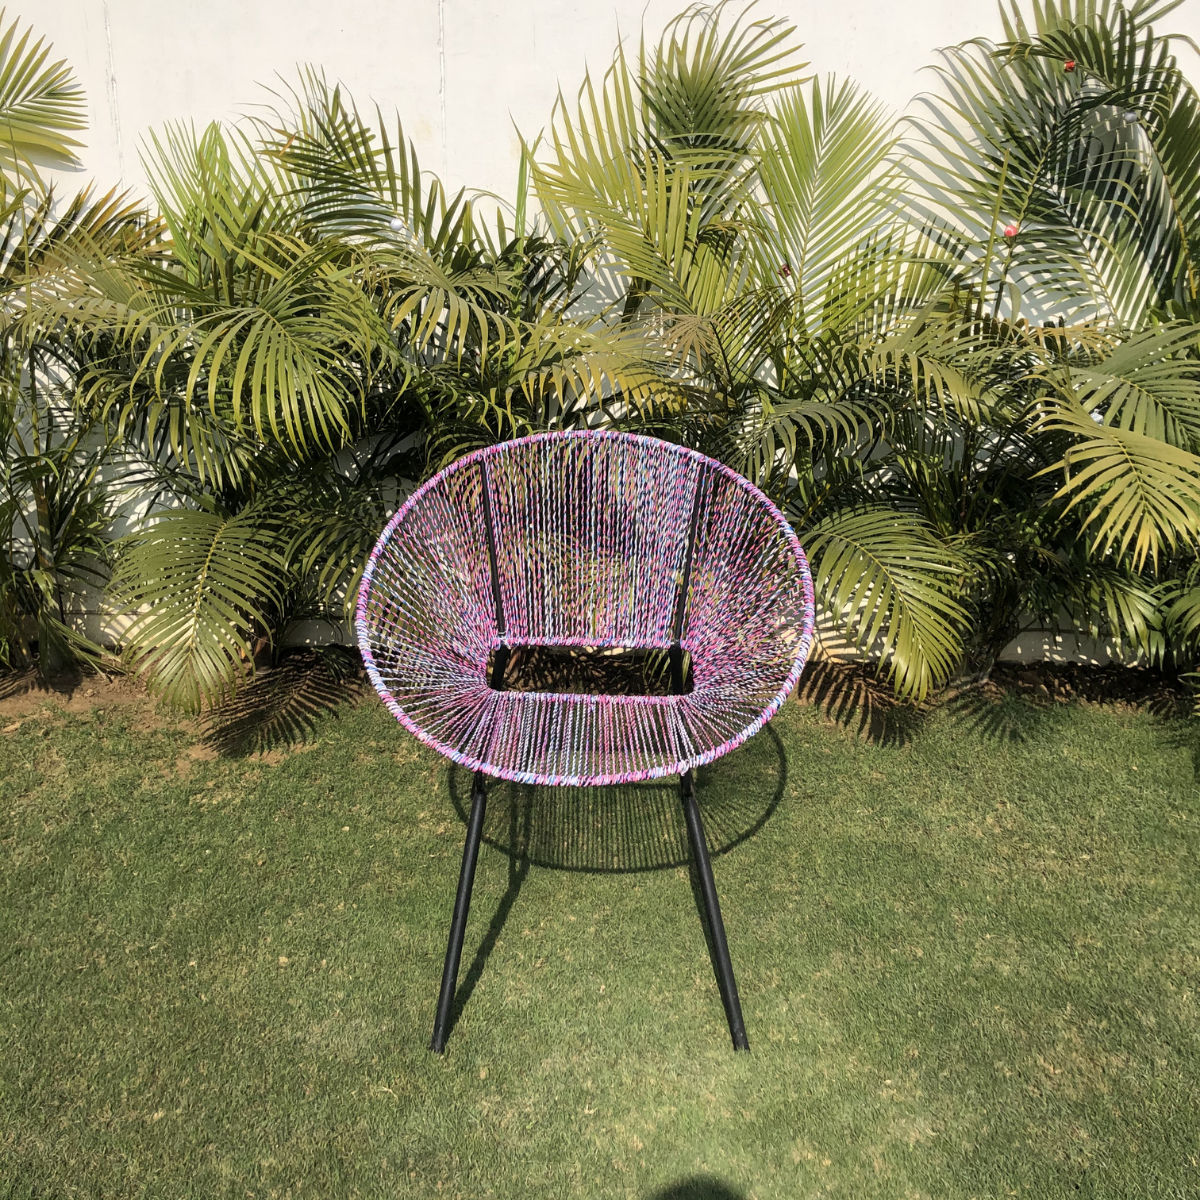 Spectrum Upcycled Plastic Lounge Chair